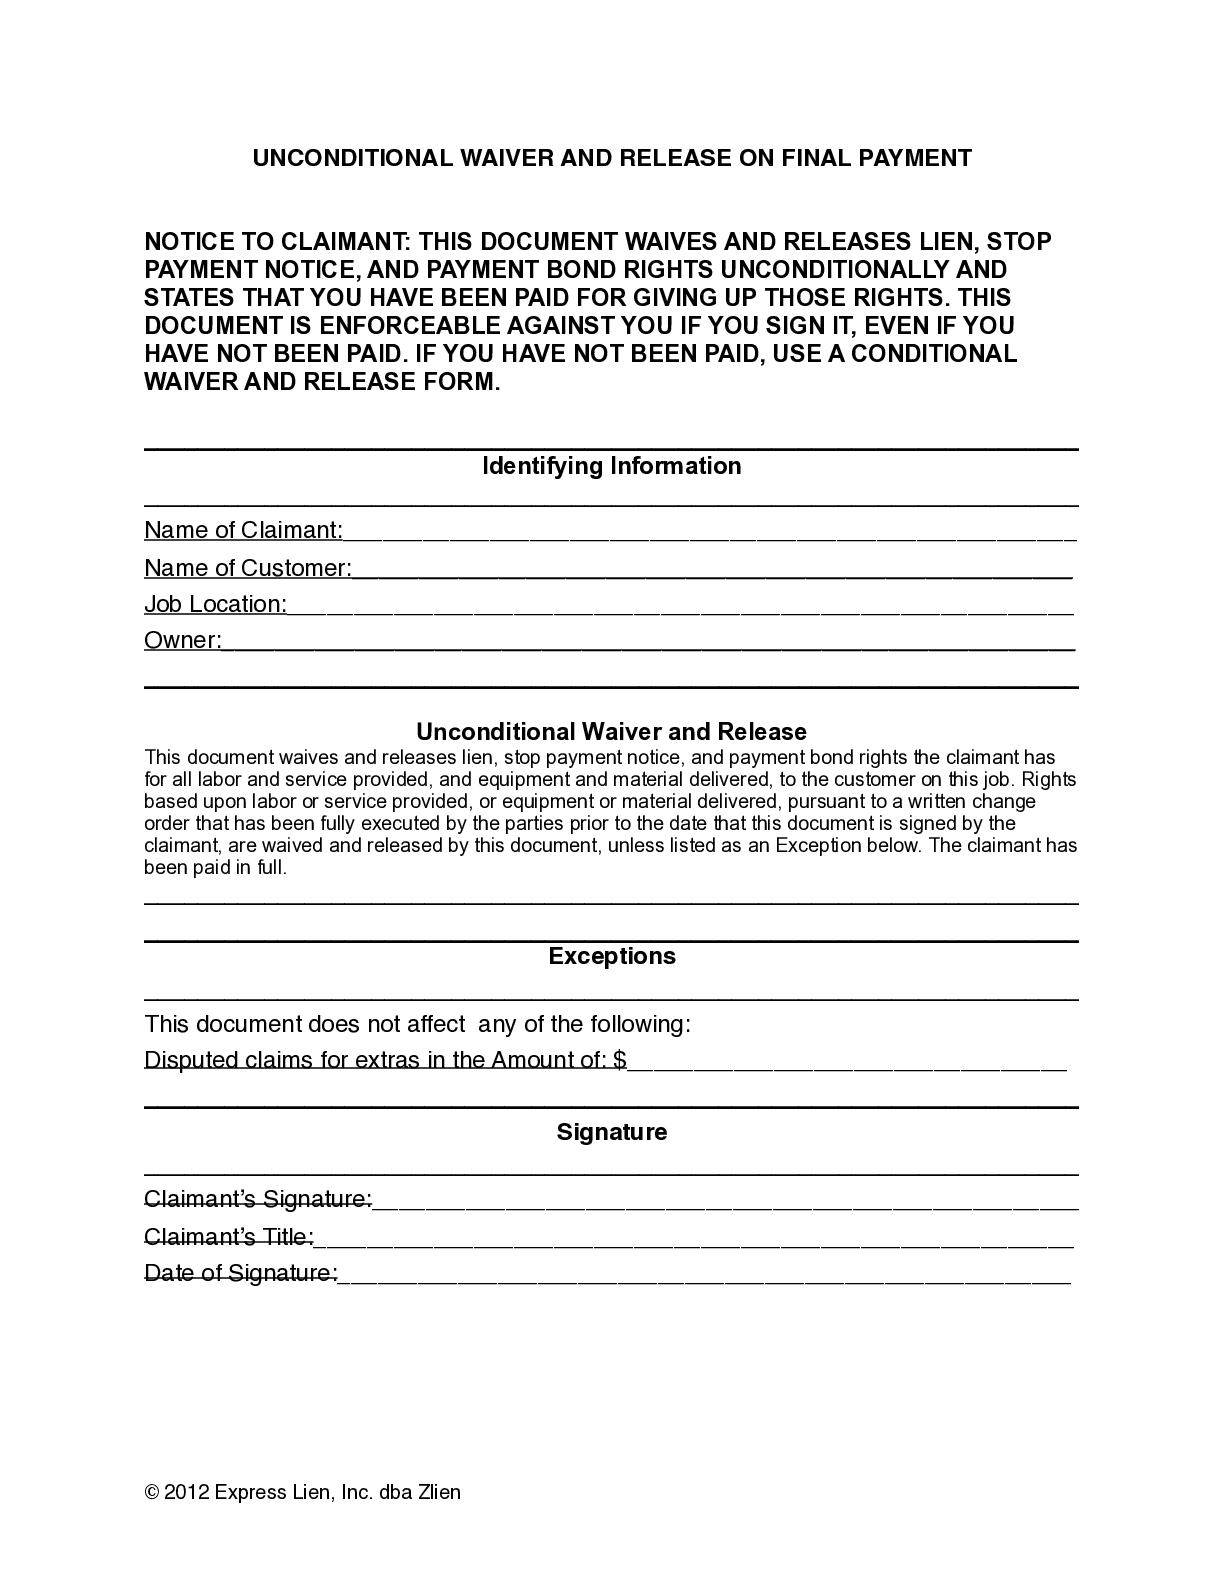 Wisconsin Final Unconditional Lien Waiver Form - free from